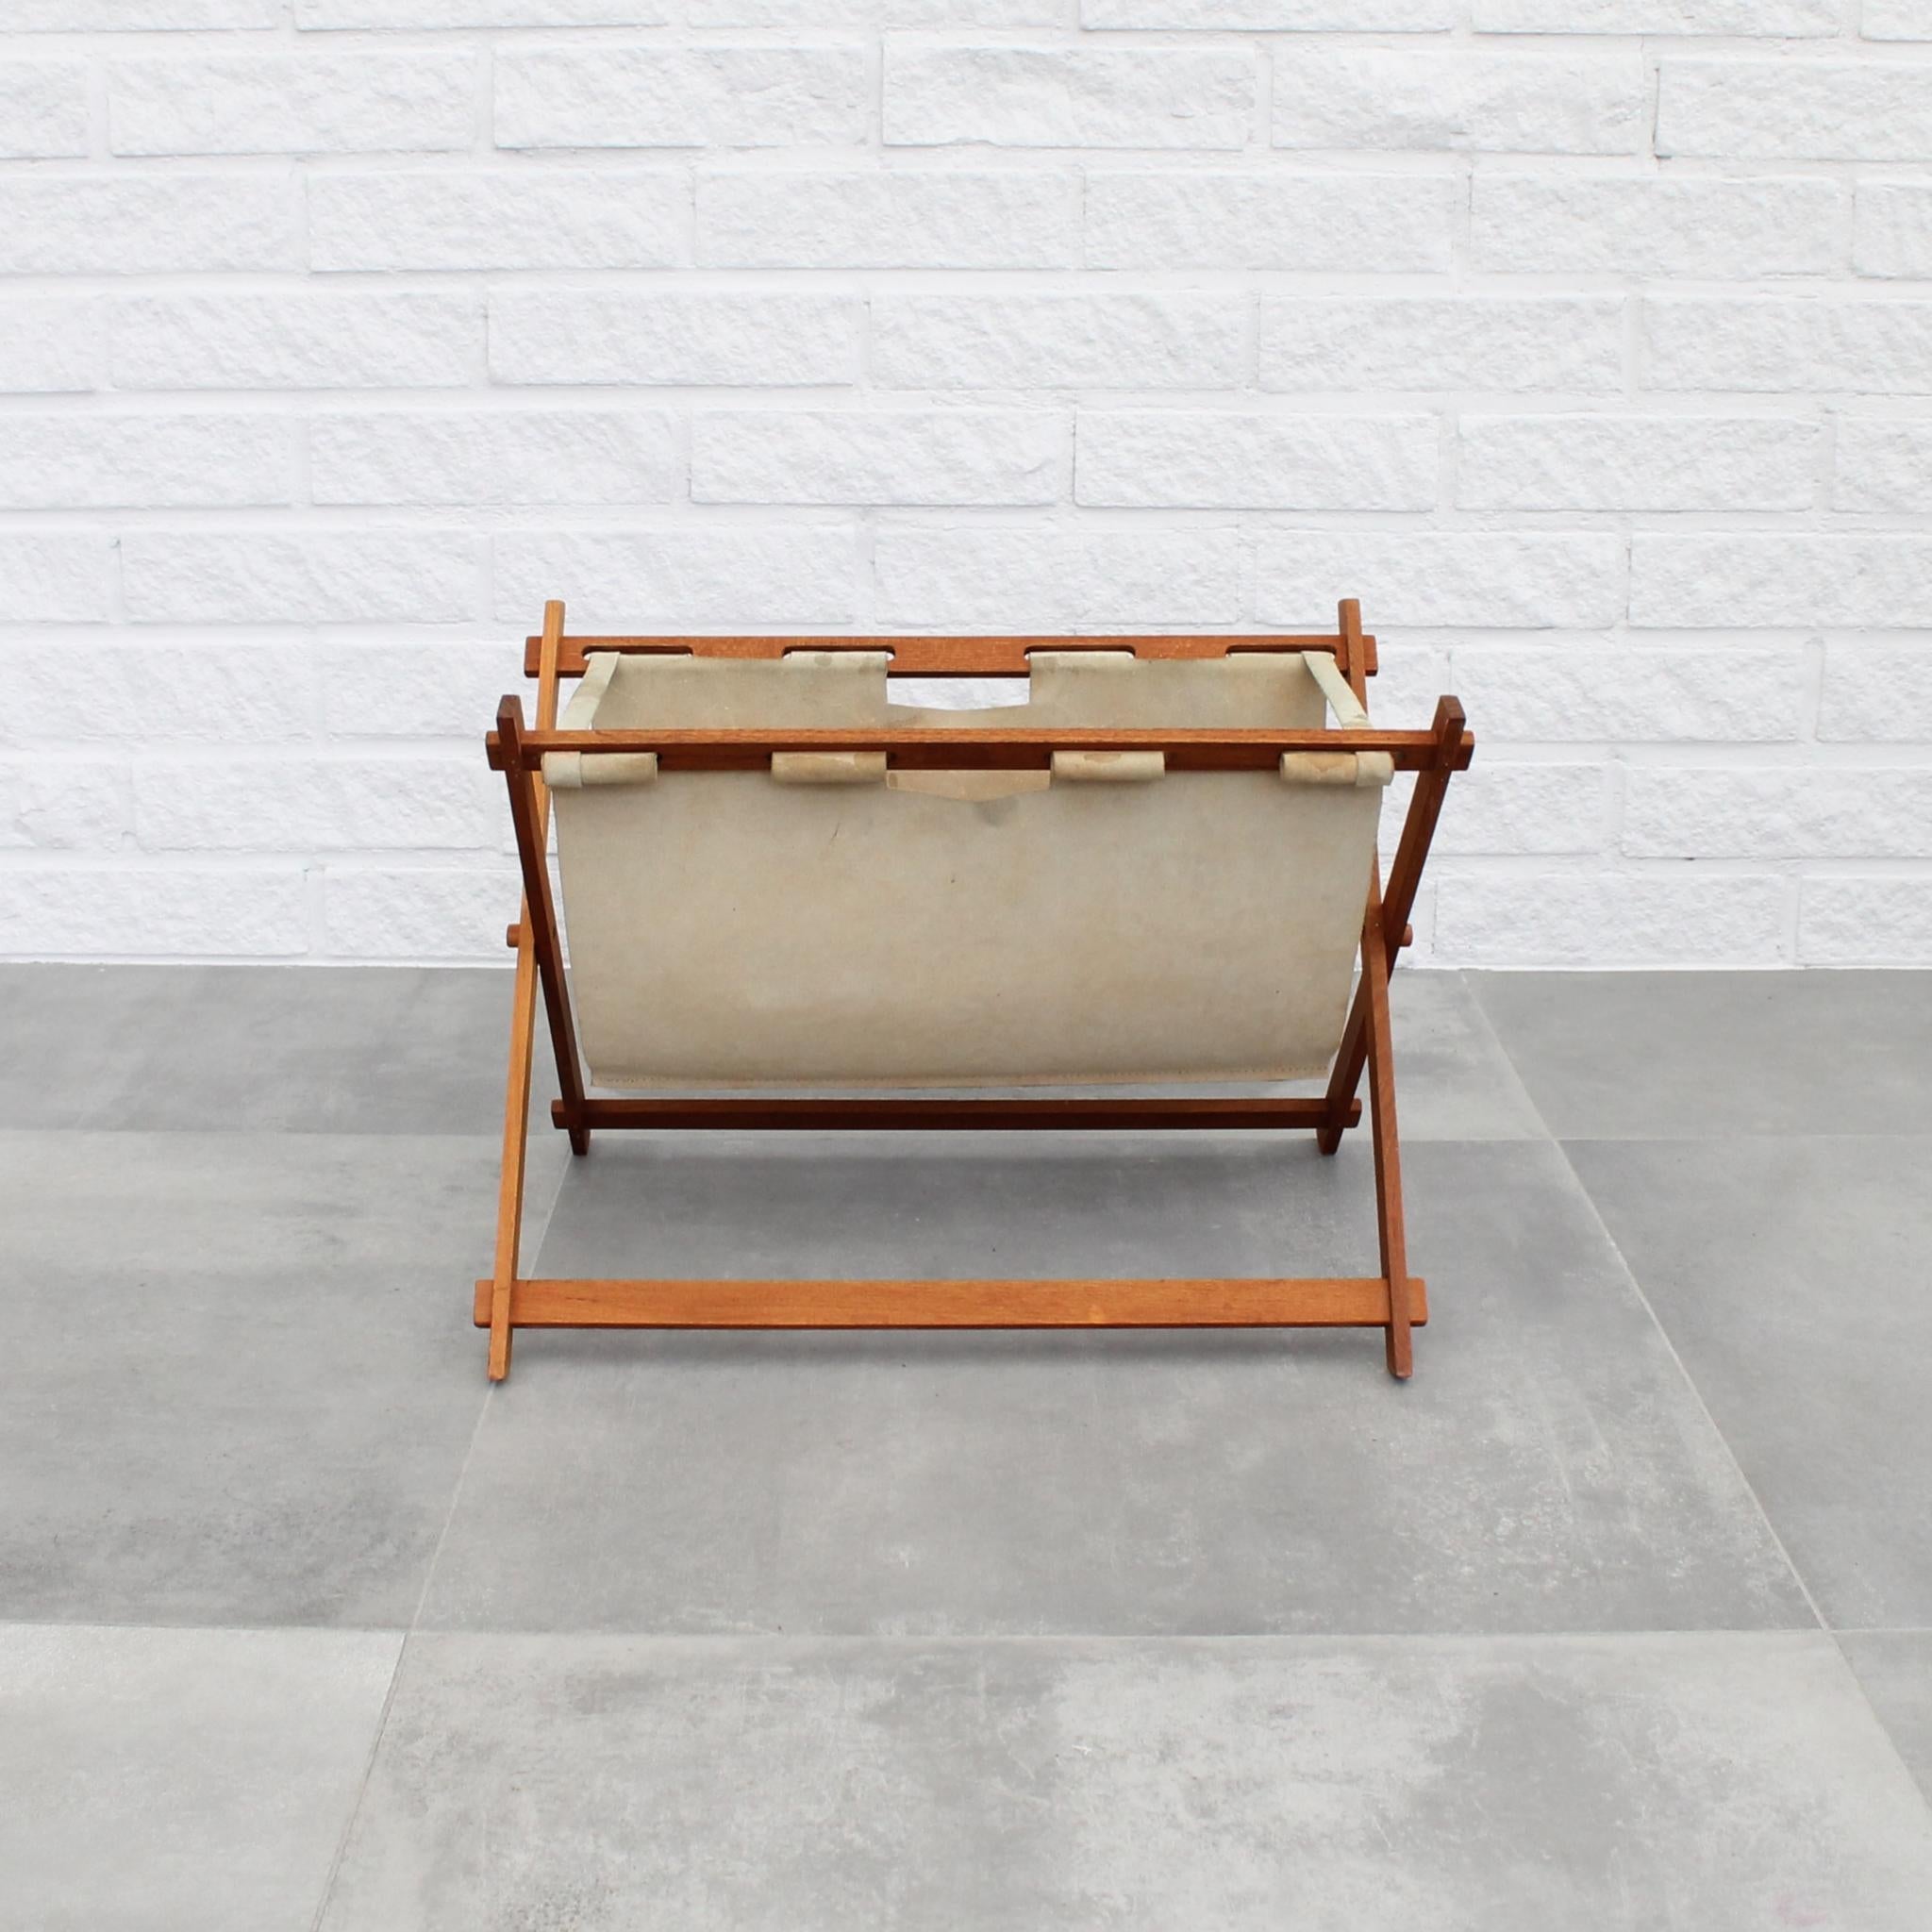 Swedish mid-century magazine rack crafted from solid teak, featuring suede leather. Its foldable design allows for convenient storage and transport. Notably, the sling leather is secured in place by wooden dowels, giving the magazine rack its